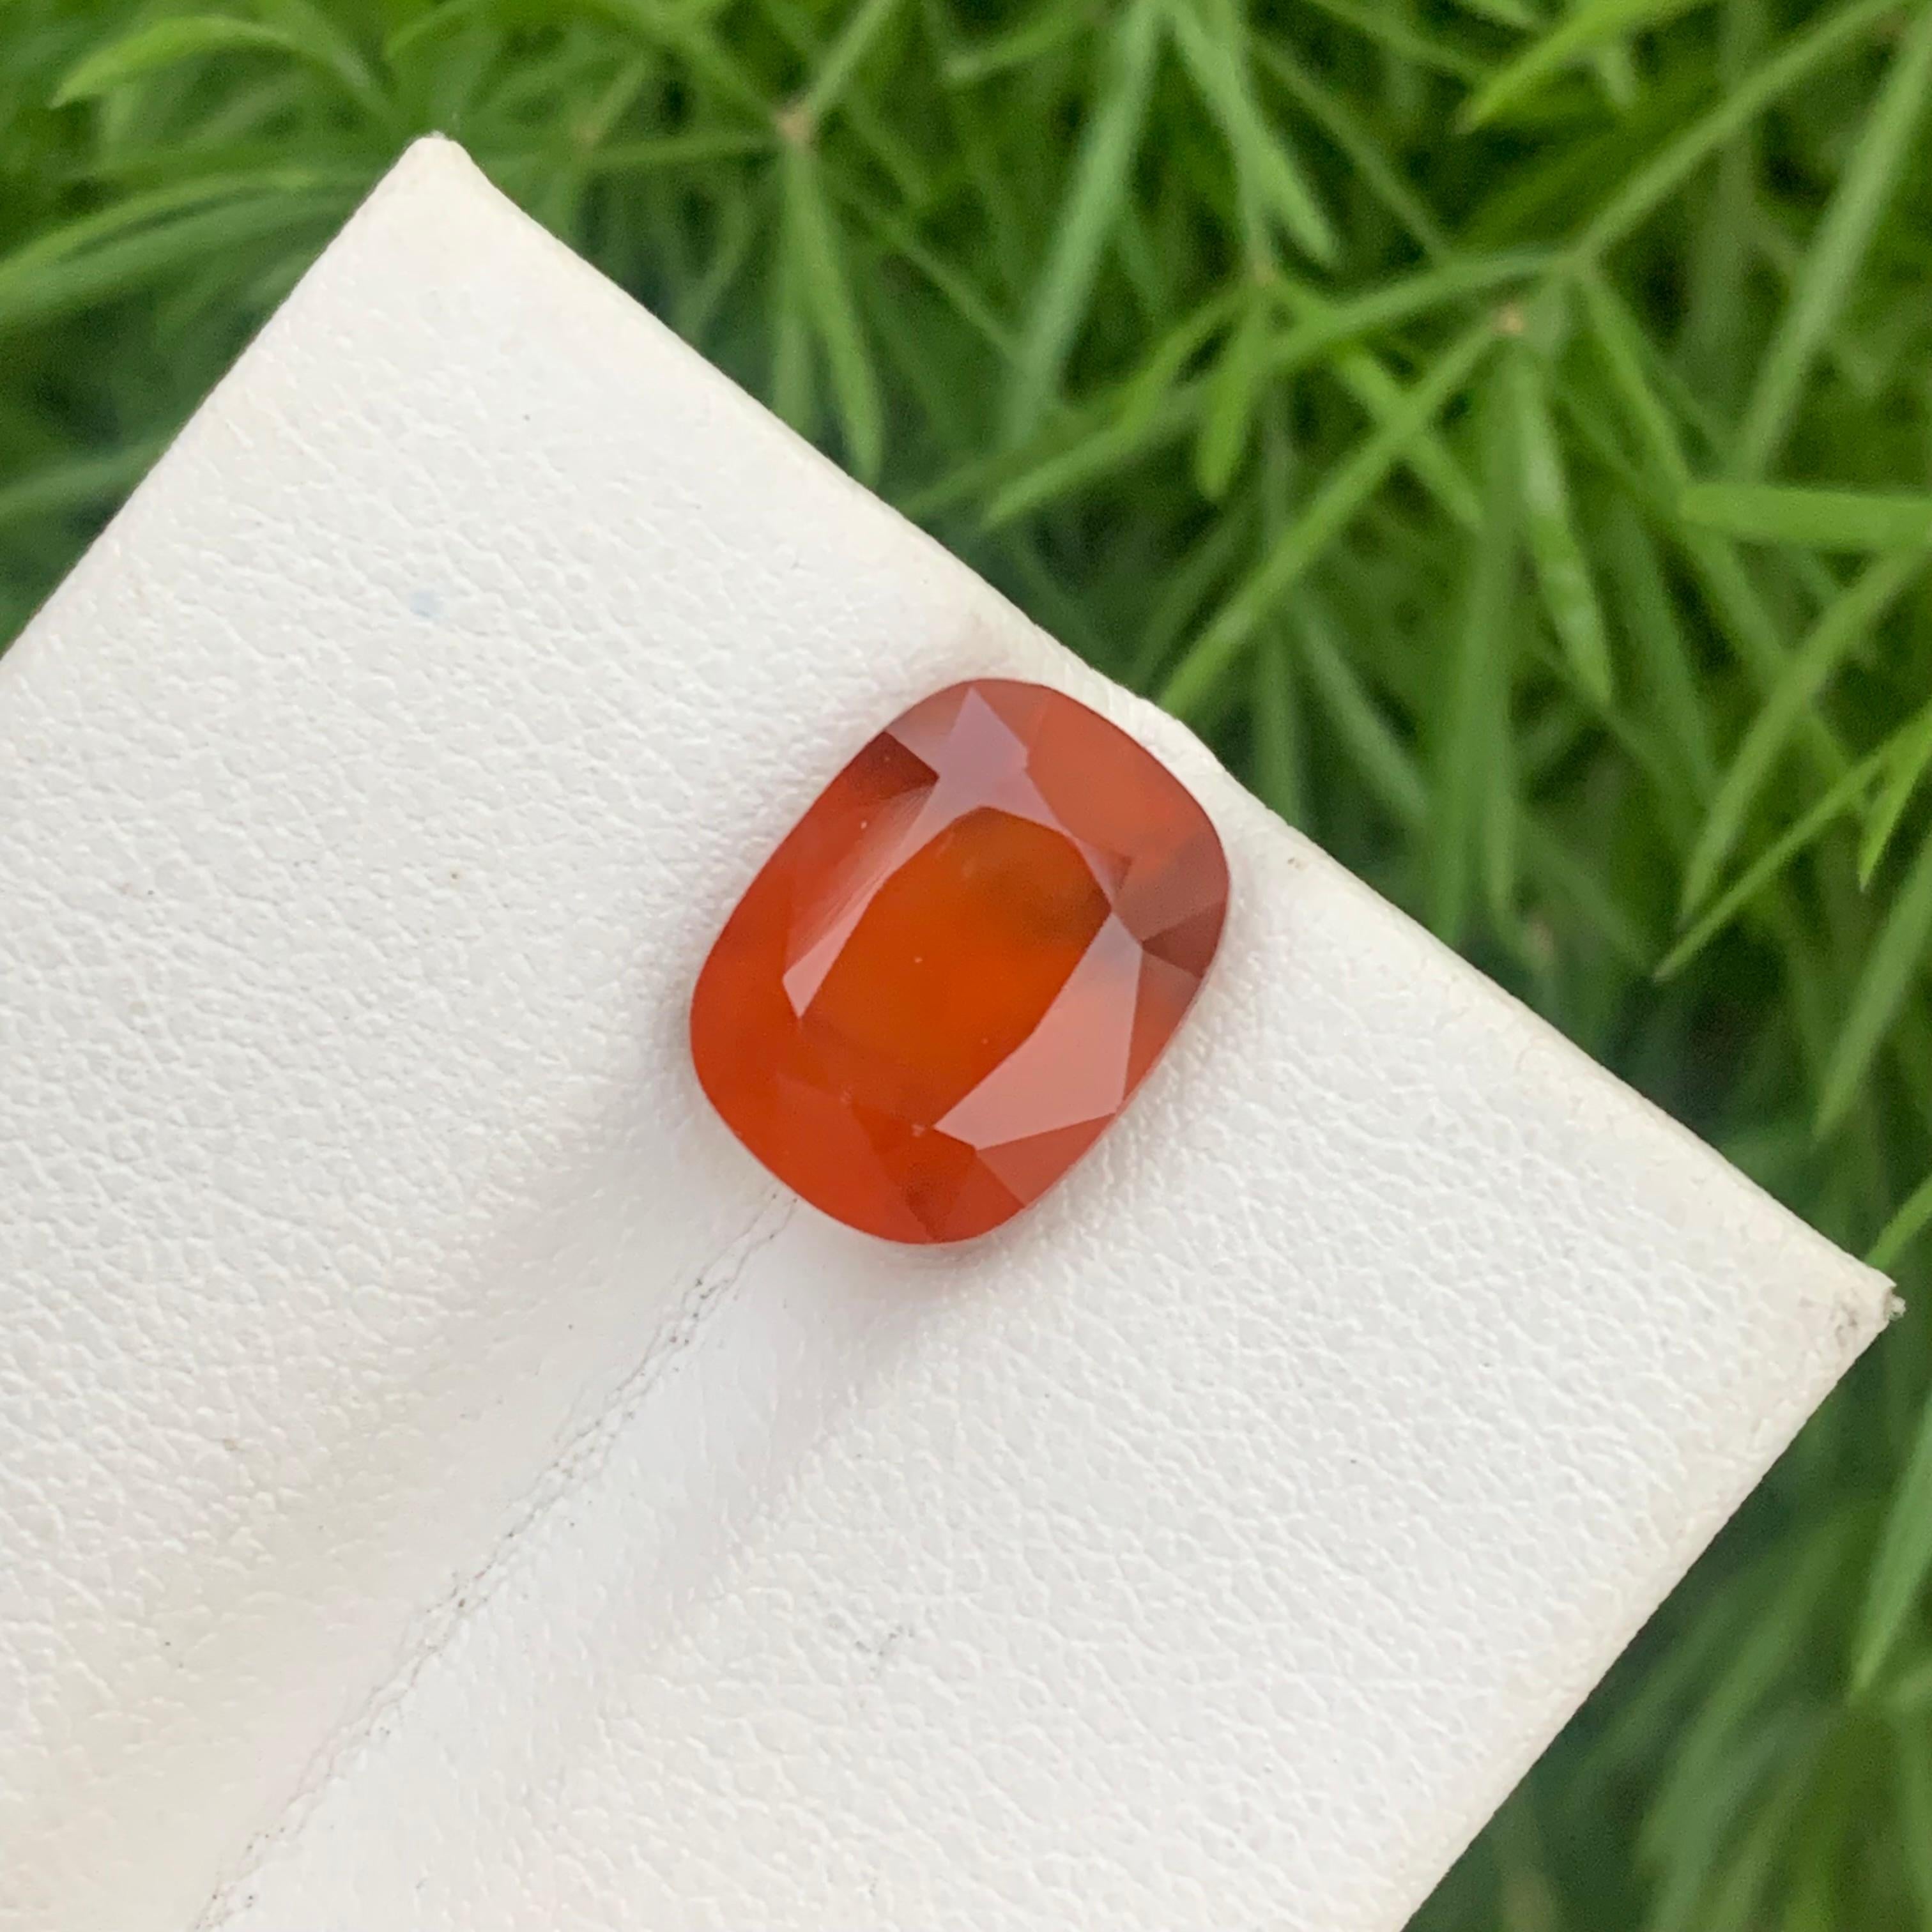 Loose Hessonite Garnet 
Weight: 7 Carats 
Dimension: 12.3x9.4x7.1 Mm
Origin: Madagascar Africa 
Shape: Cushion
Color: Orange 
Treatment: Non
Certificate: On Demand 
Hessonite garnet, also known as 